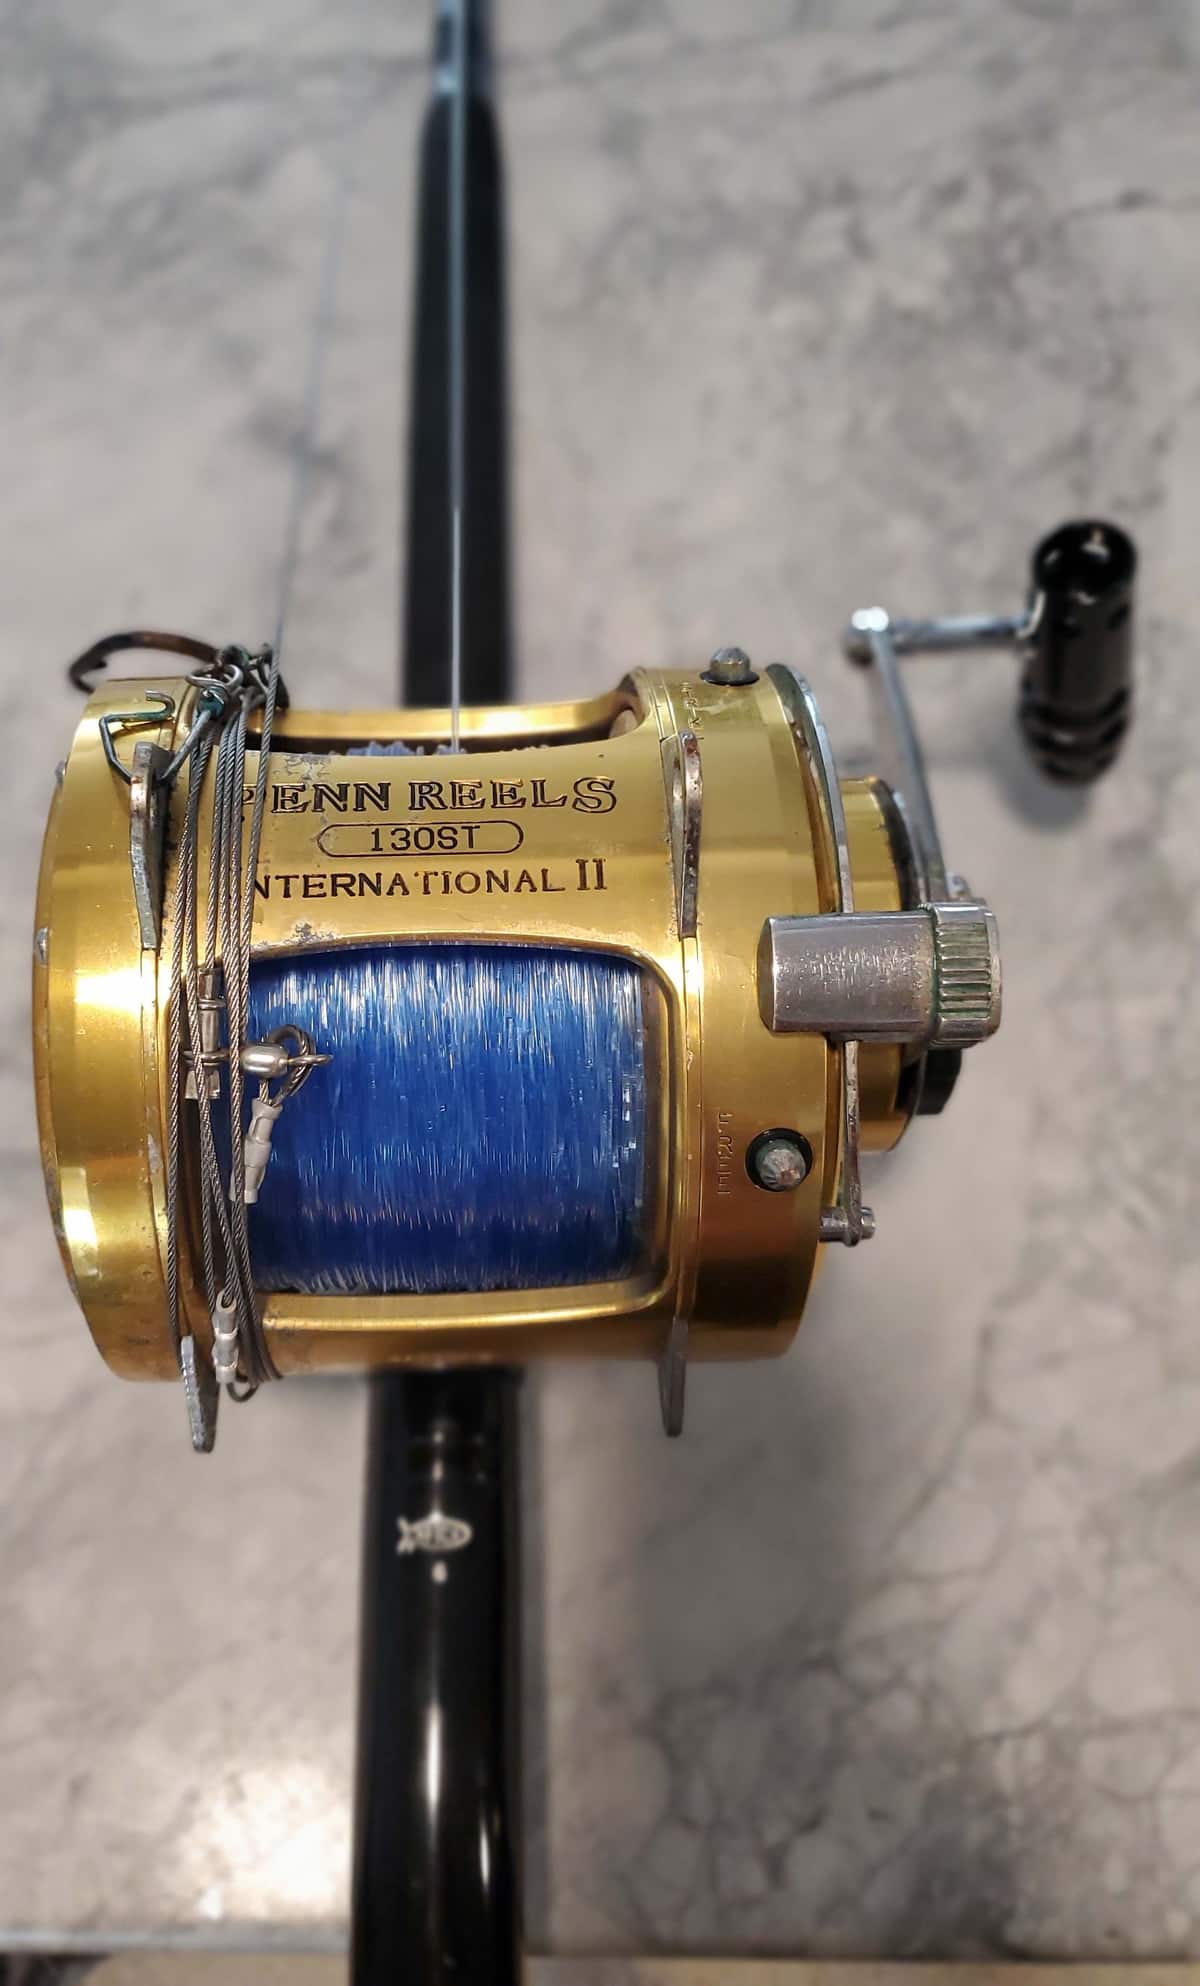 Unlimited Class Rod & Reel Combo for Sale - The Hull Truth